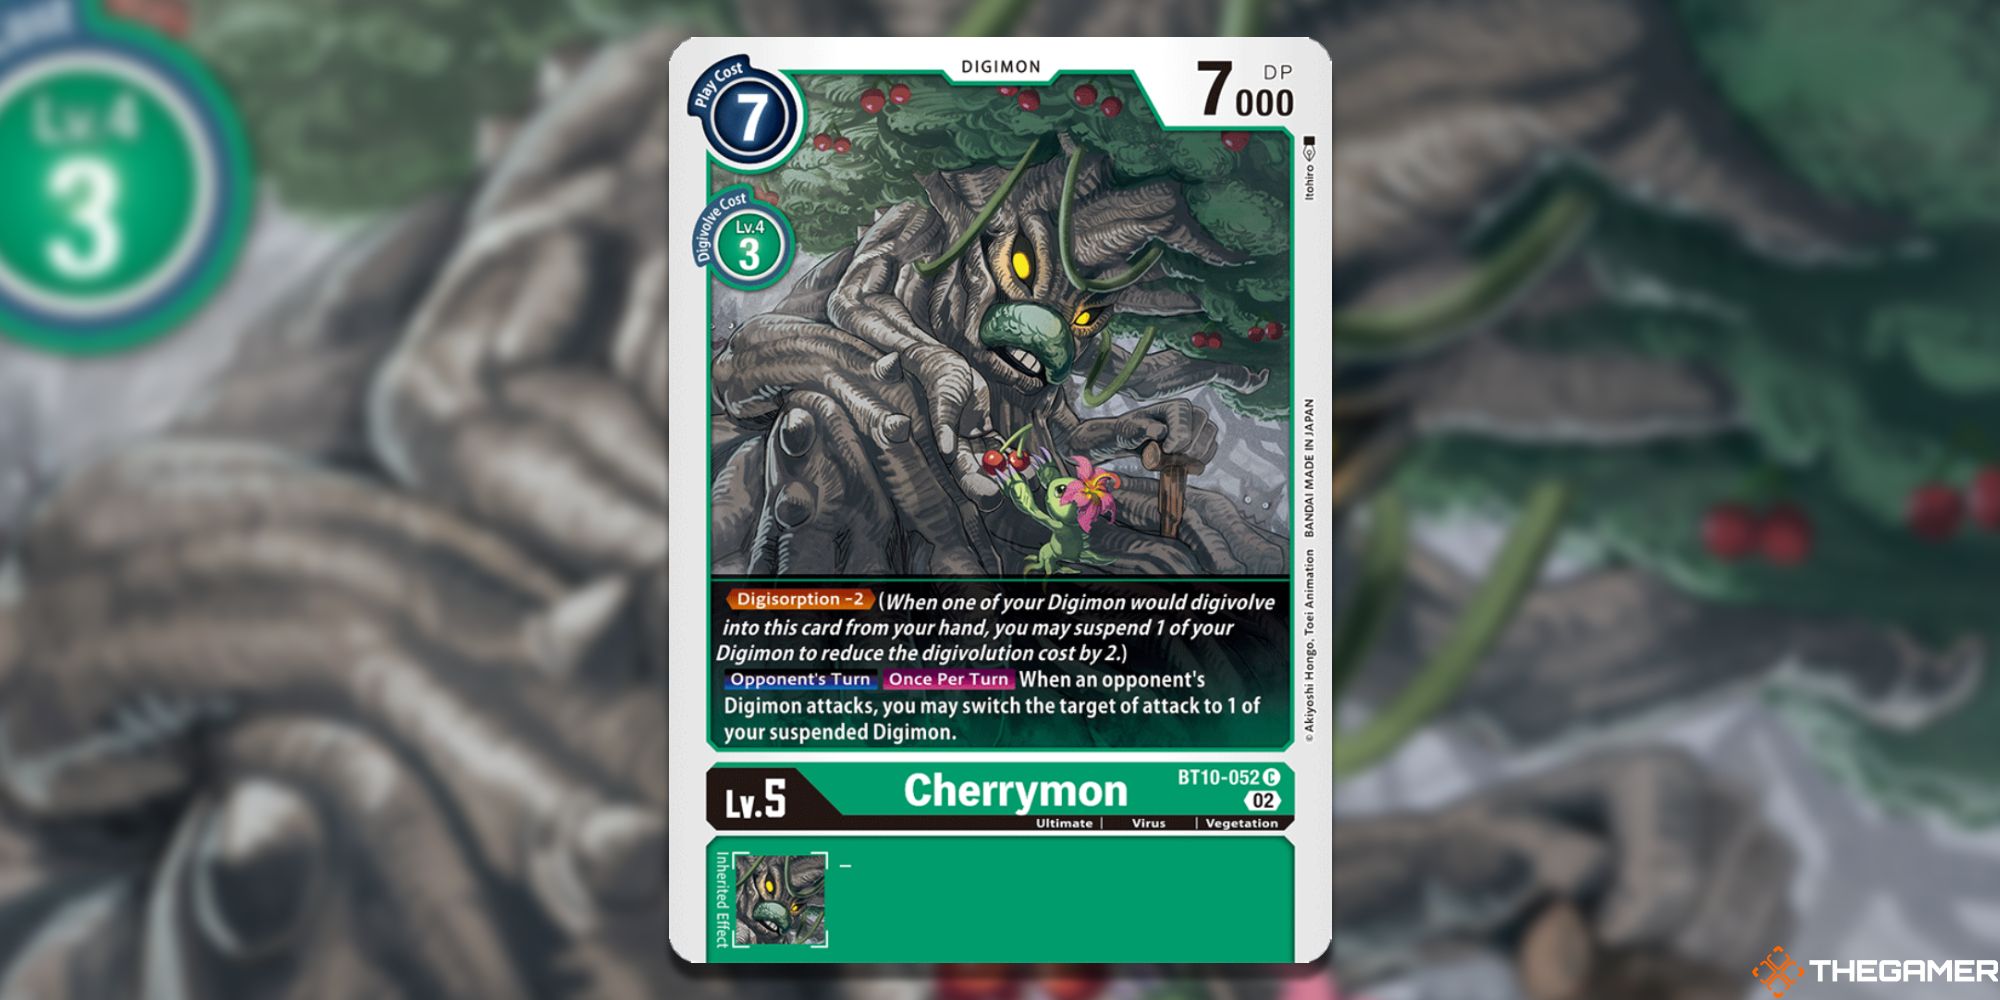 cherrymon image with blurred background digimon card game